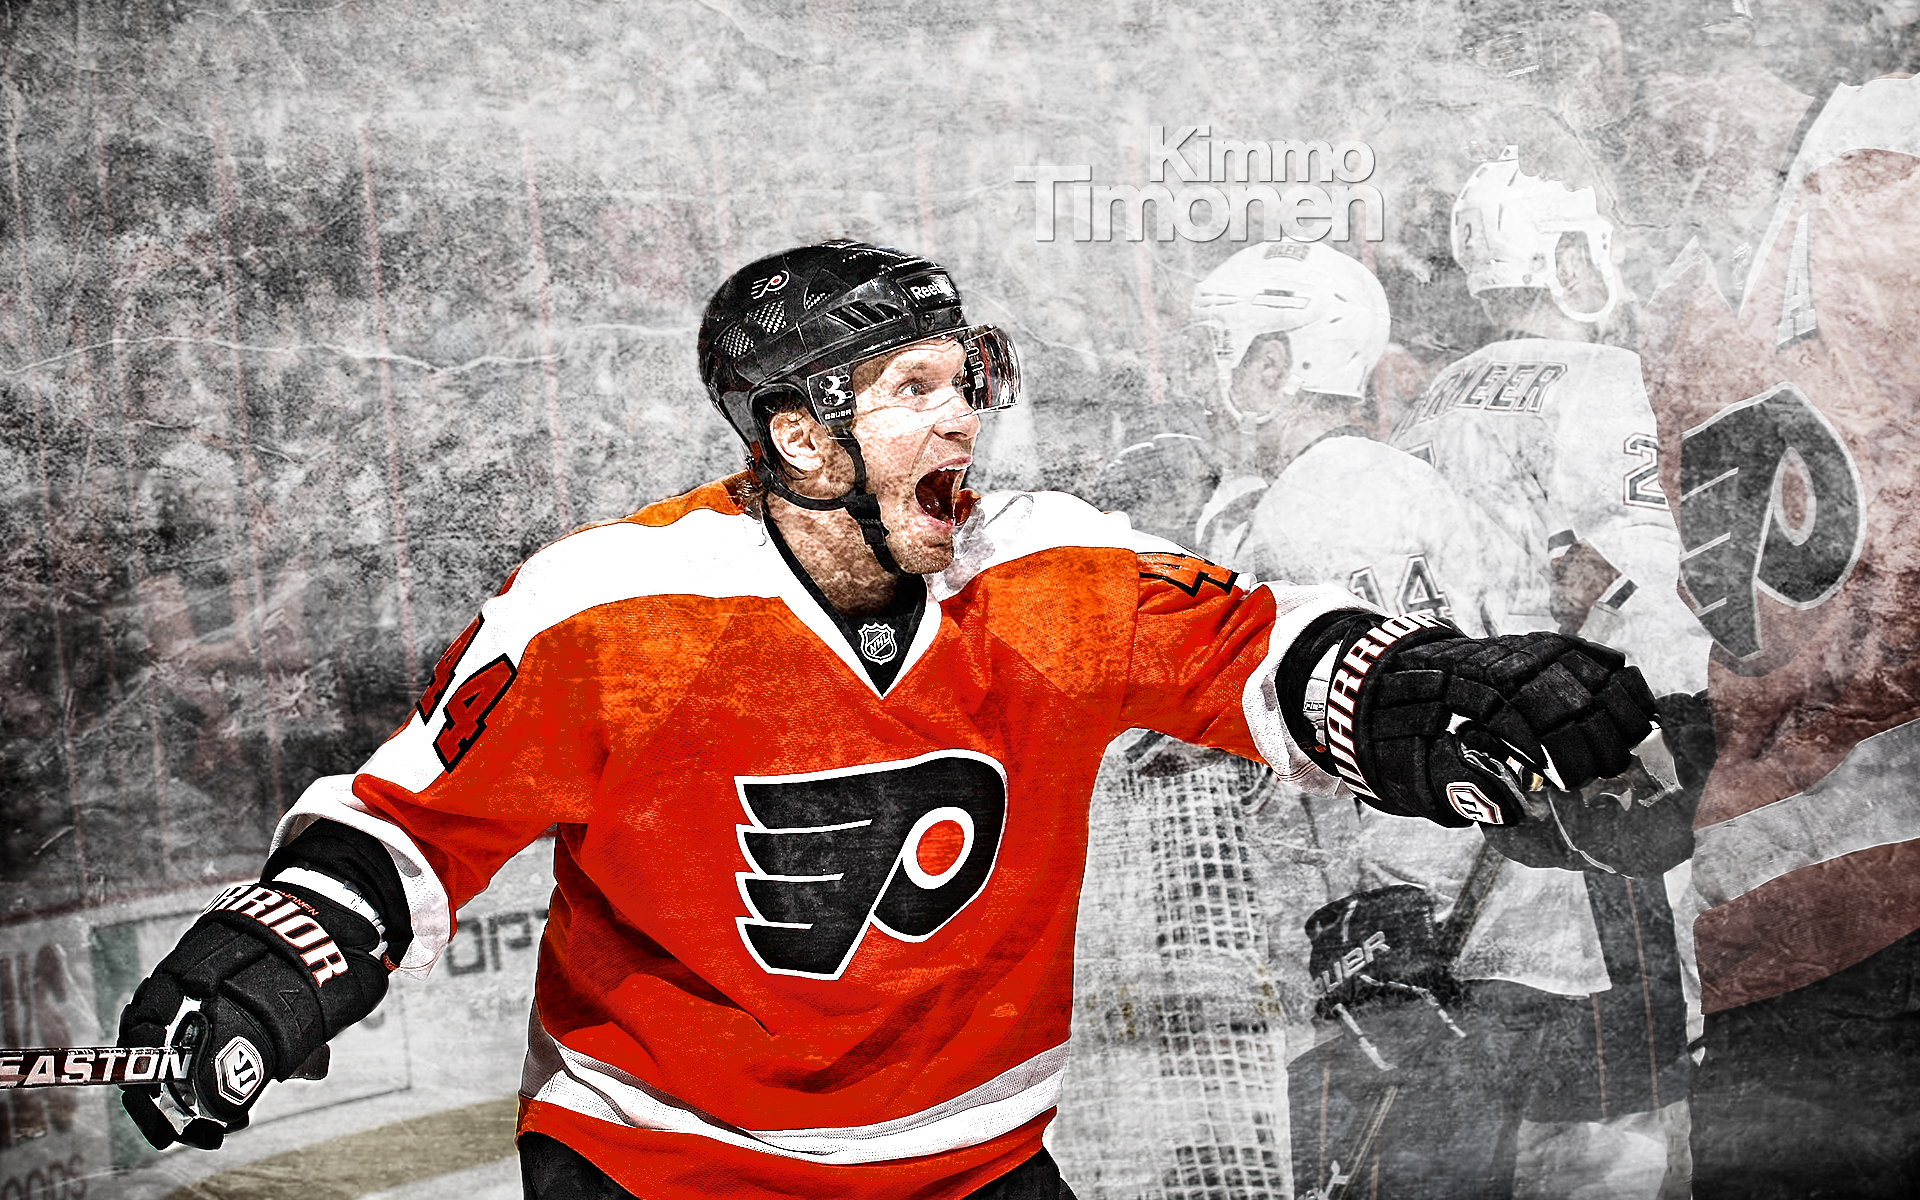 NHL player Claude Giroux wallpaper and image